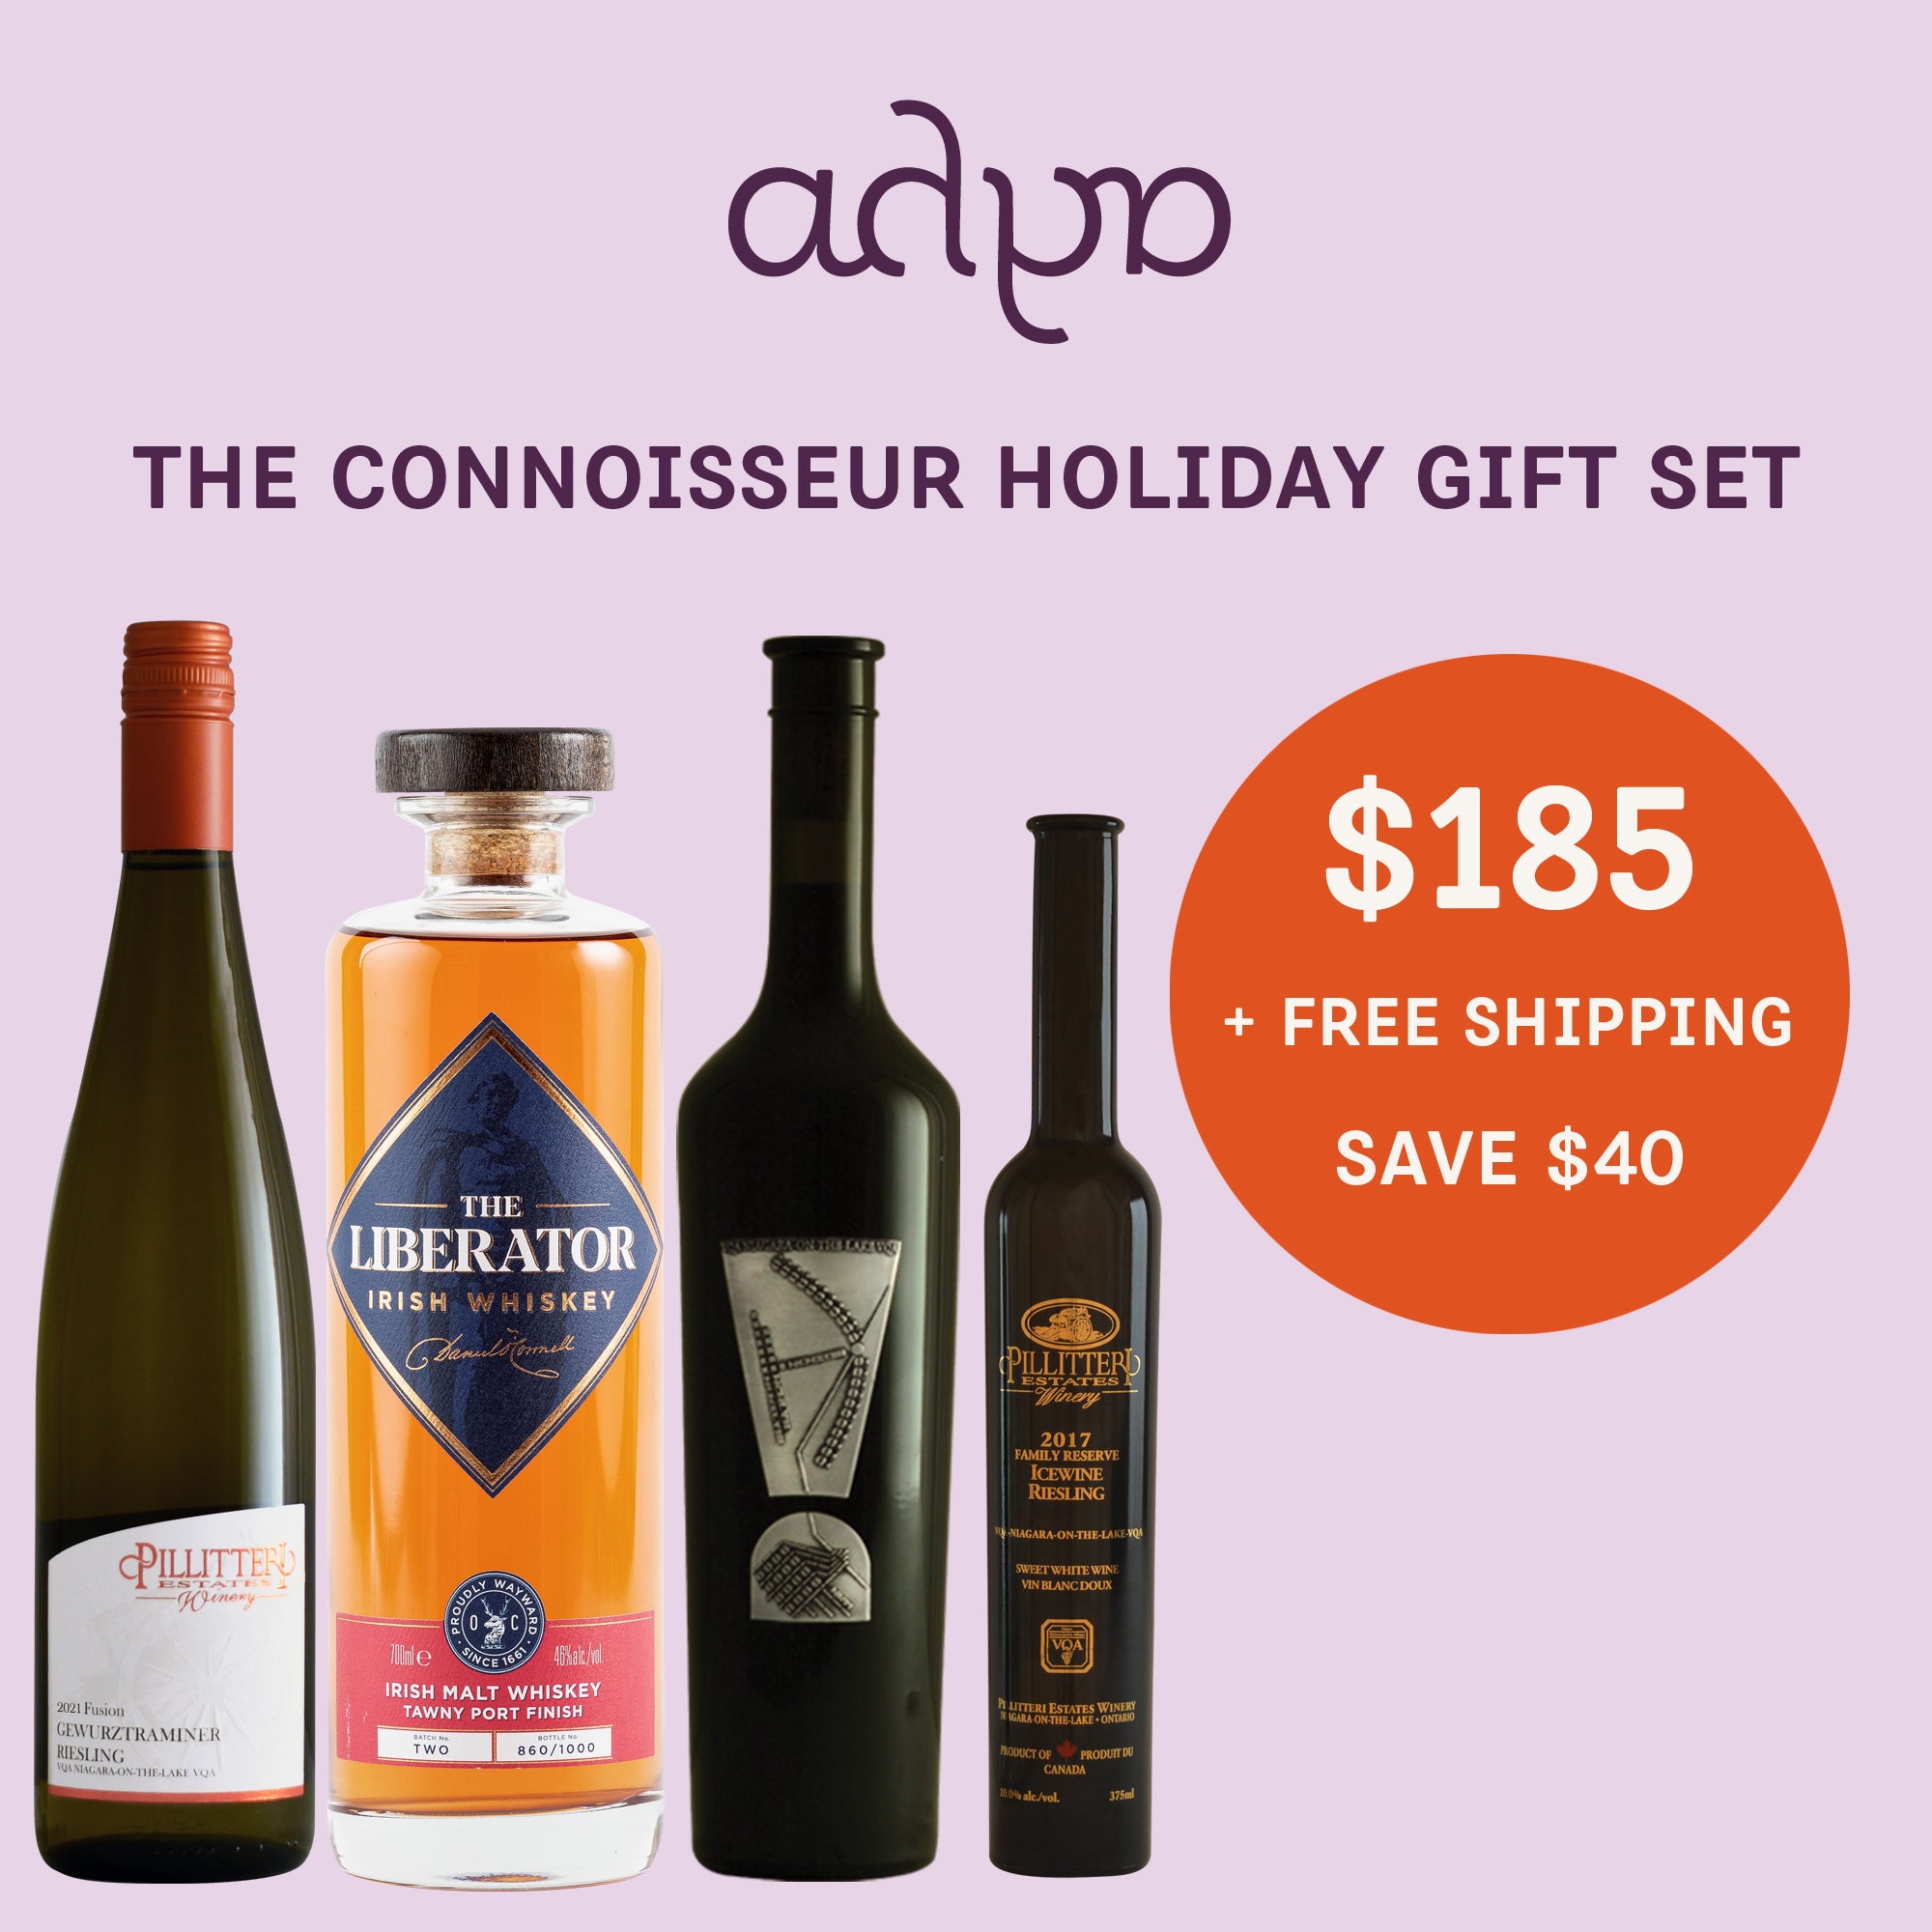 The Connoisseur Holiday Gift Set